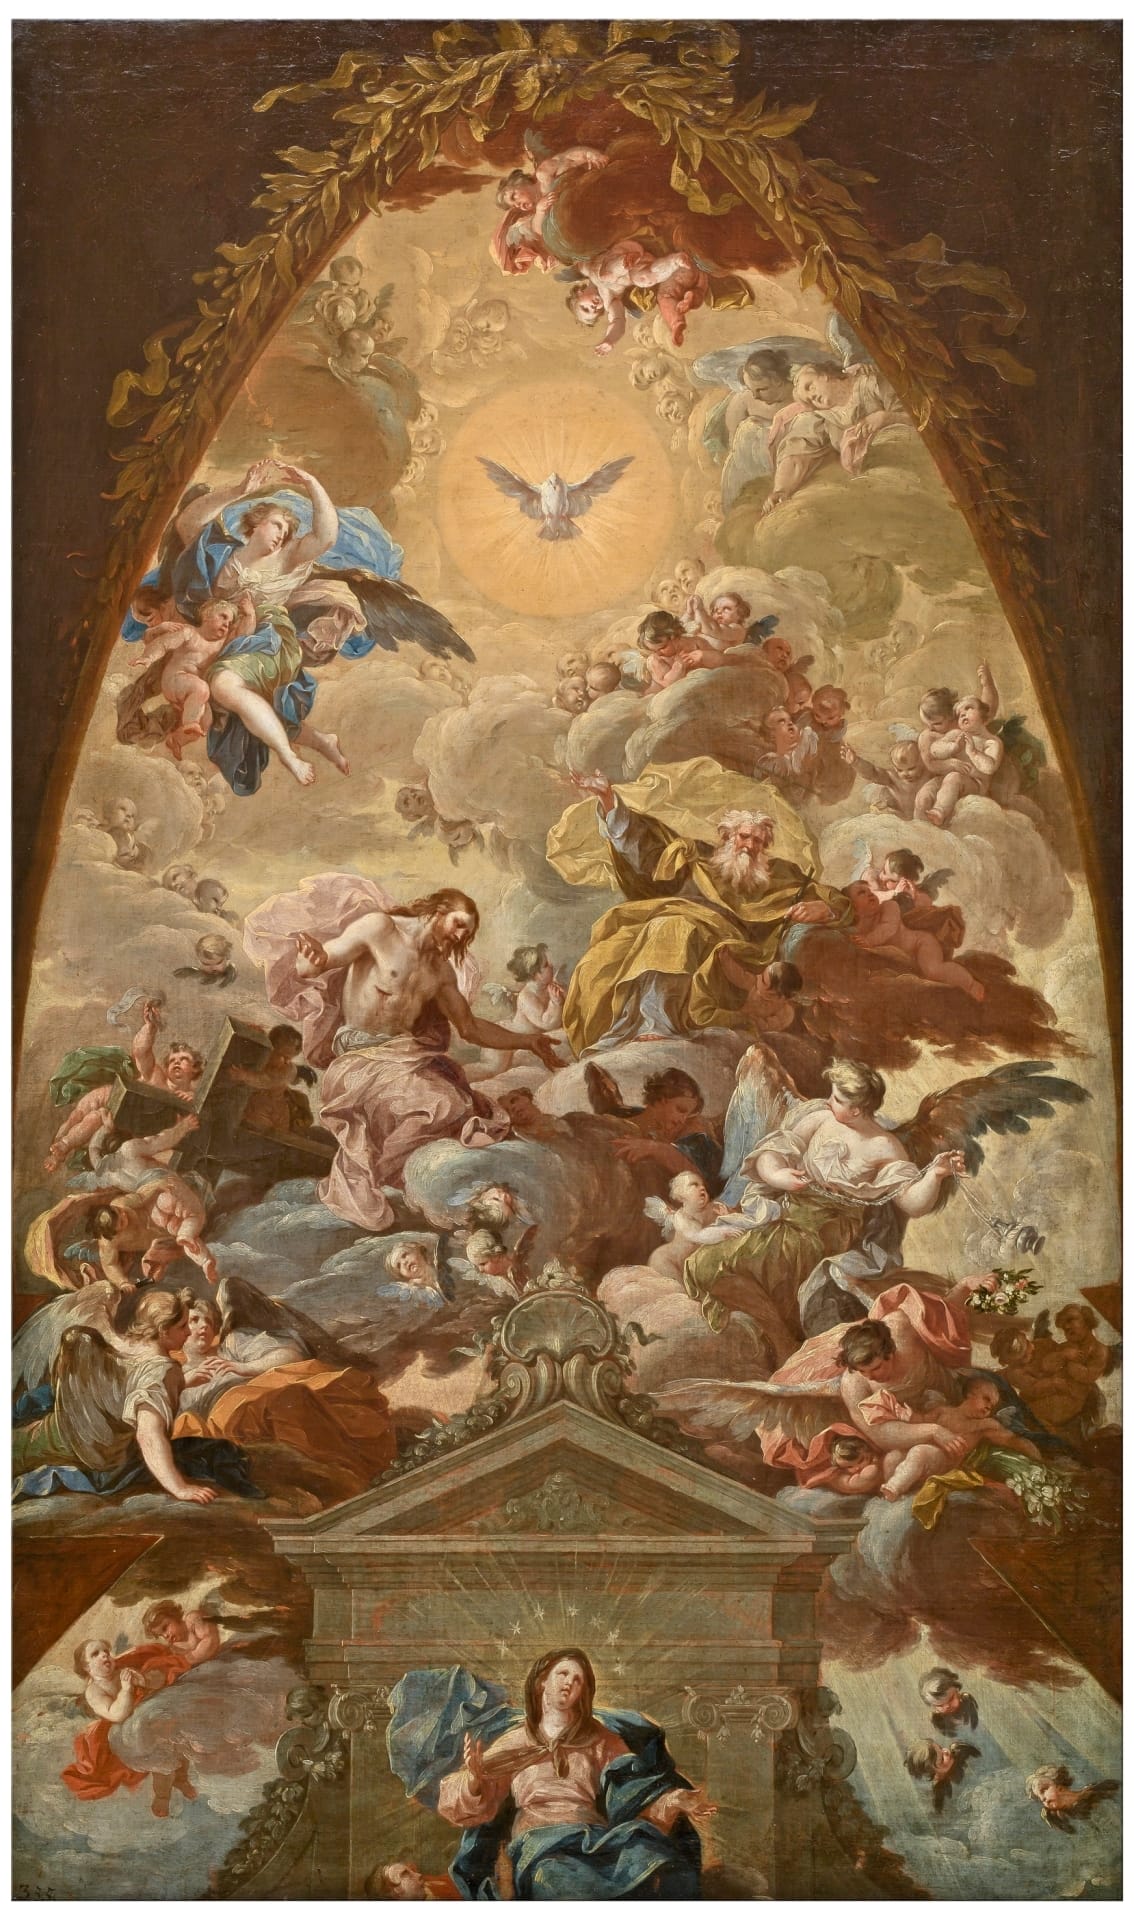 The Assumption of the Virgin (Around 1760) by Francisco Bayeu y Subias - Public Domain Catholic Painting